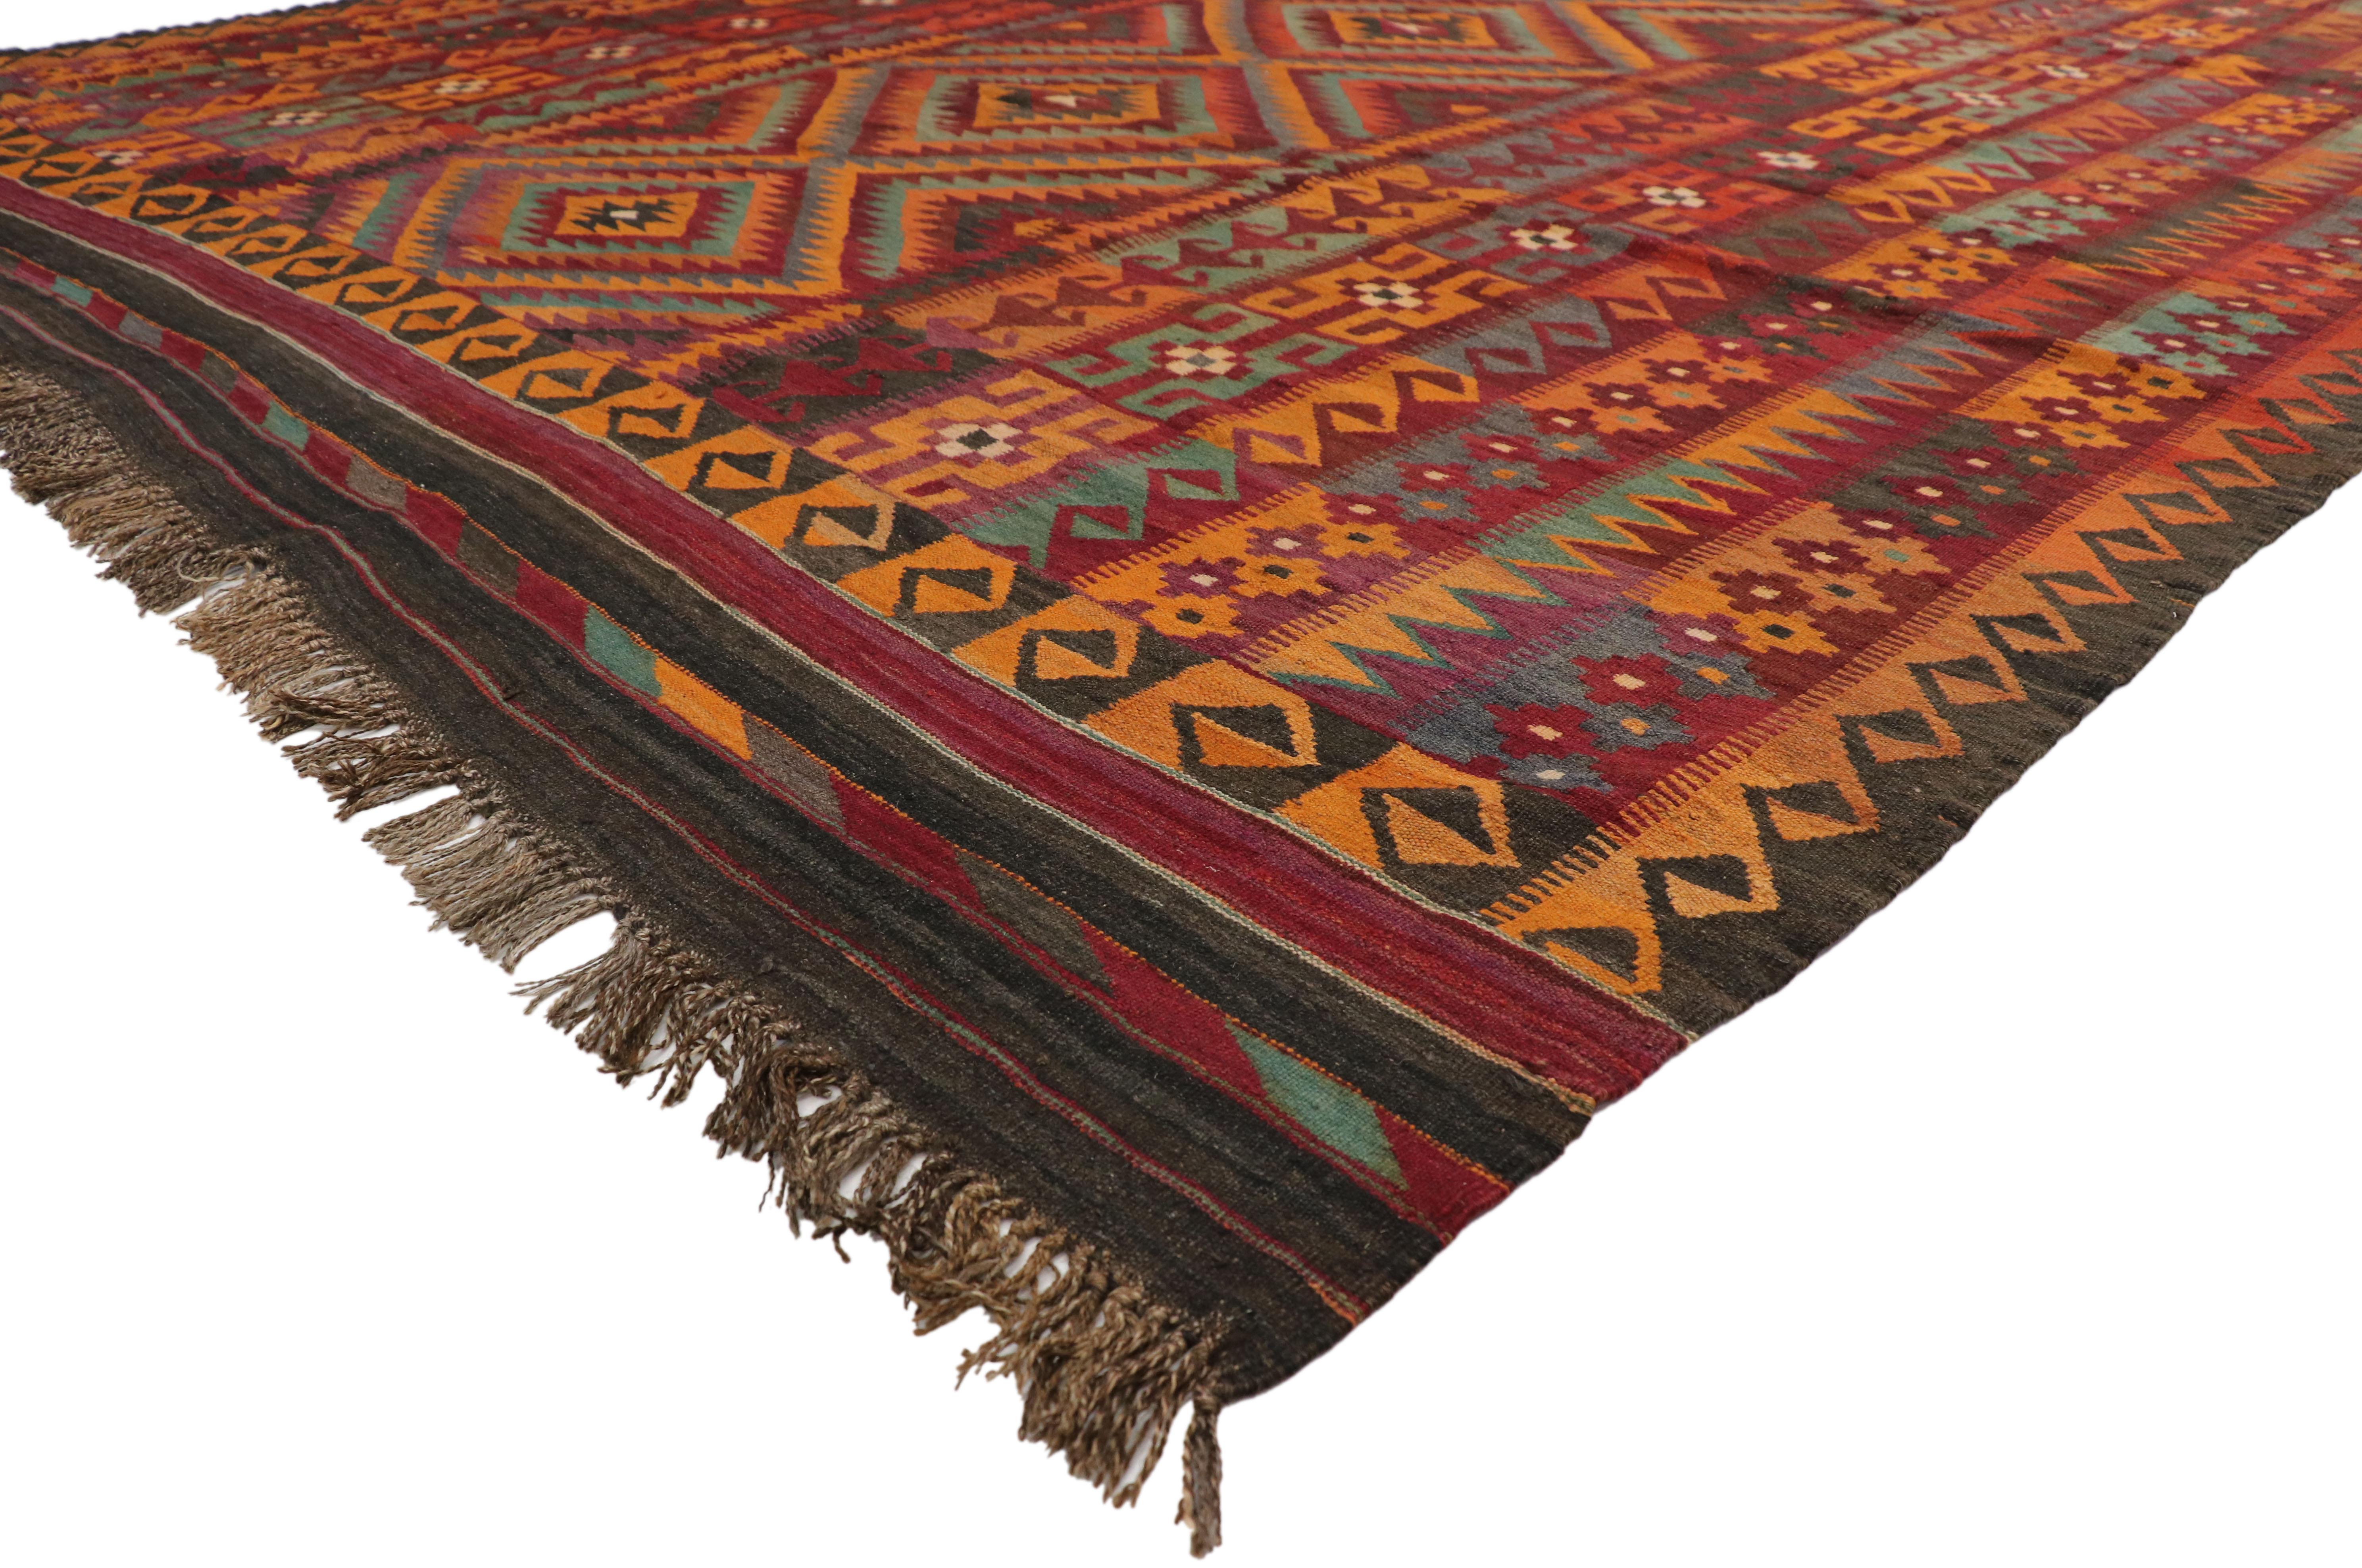 74281, vintage Afghan Ghalmouri Maimana Kilim rug with Nomadic Tribal style. Boasting a stunning tribal design and modern style, this vintage Afghan Kilim rug shows its age beautifully. From variegated shades of red, orange, slate, blue-gray, mint,